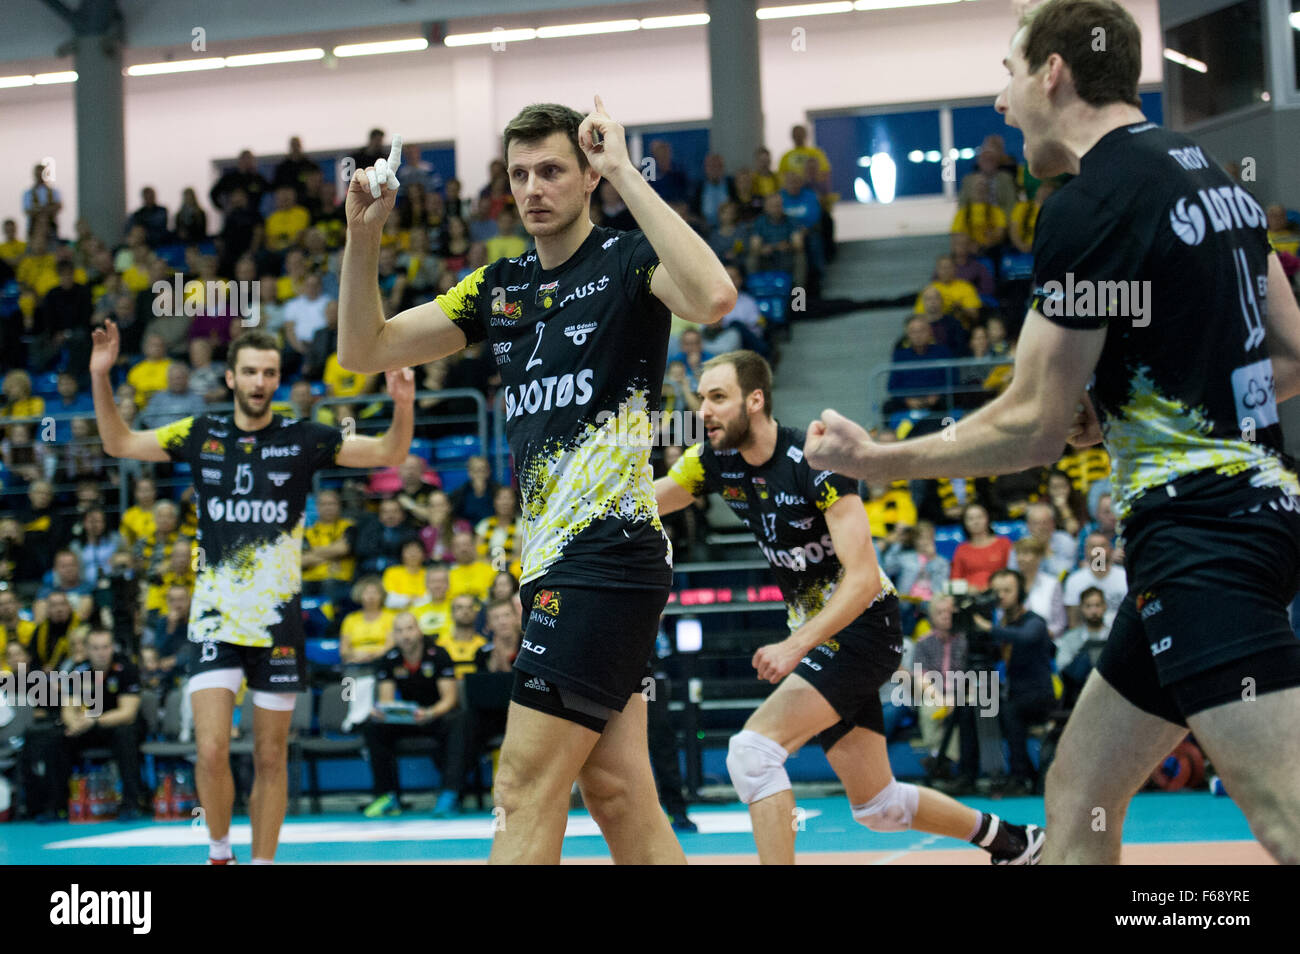 Belchatow, Poland. 14th November 2015. Wojciech Grzyb of Lotos Trefl Gdansk, pictured during a game against  PGE Skra Belchatow in the Plus Liga Polish Professional Volleyball League. Team PGE Skra went on to win 3-0. Credit:  Marcin Rozpedowski/Alamy Live News Stock Photo